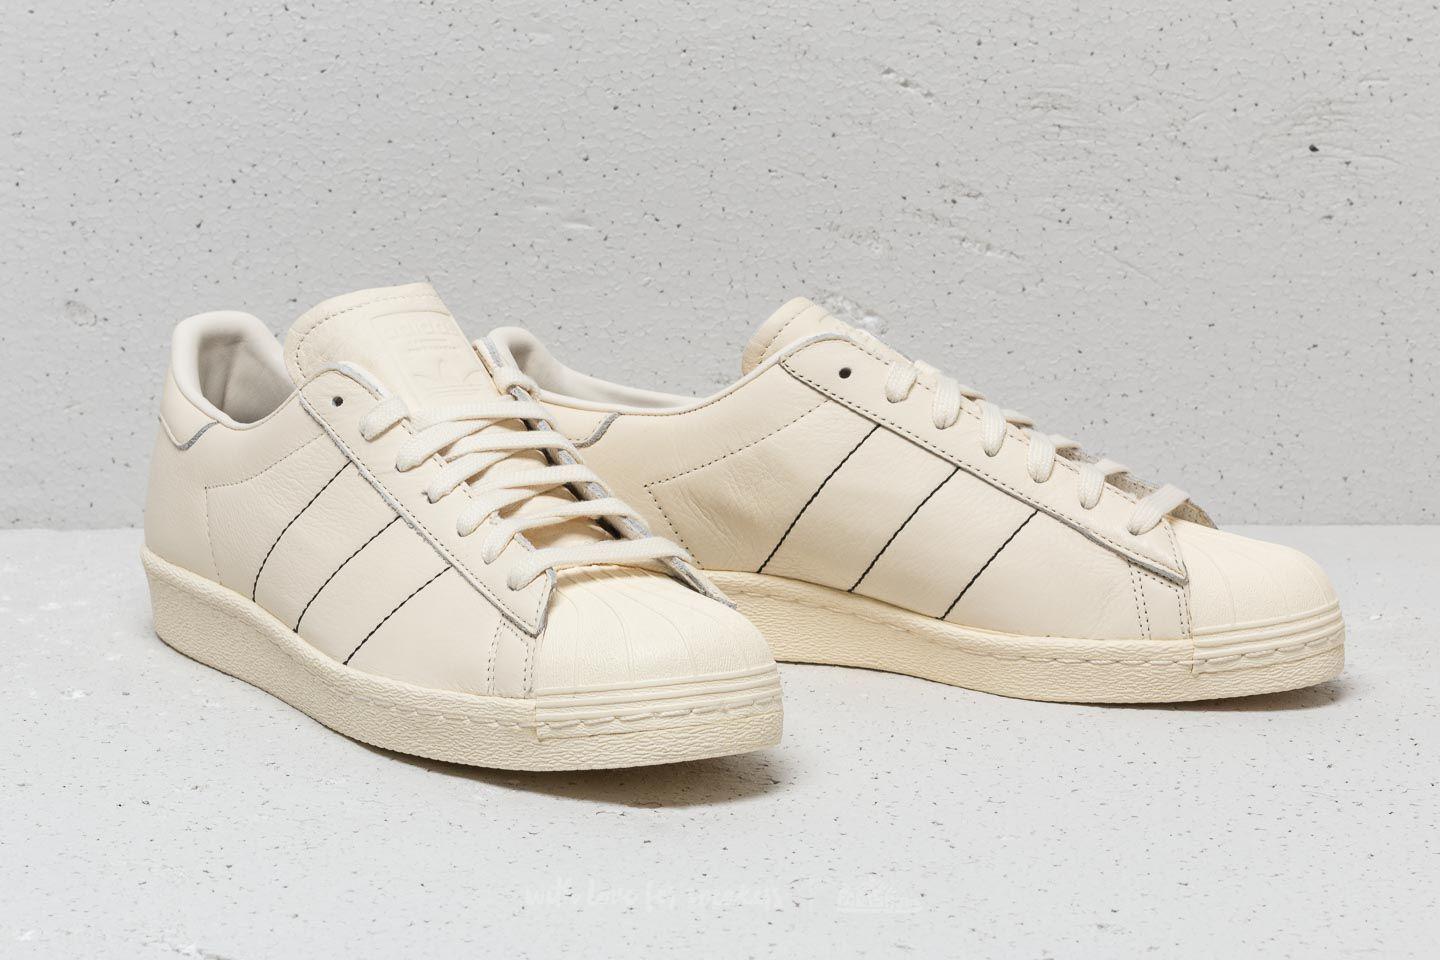 adidas superstar 80s cream white buy clothes shoes online